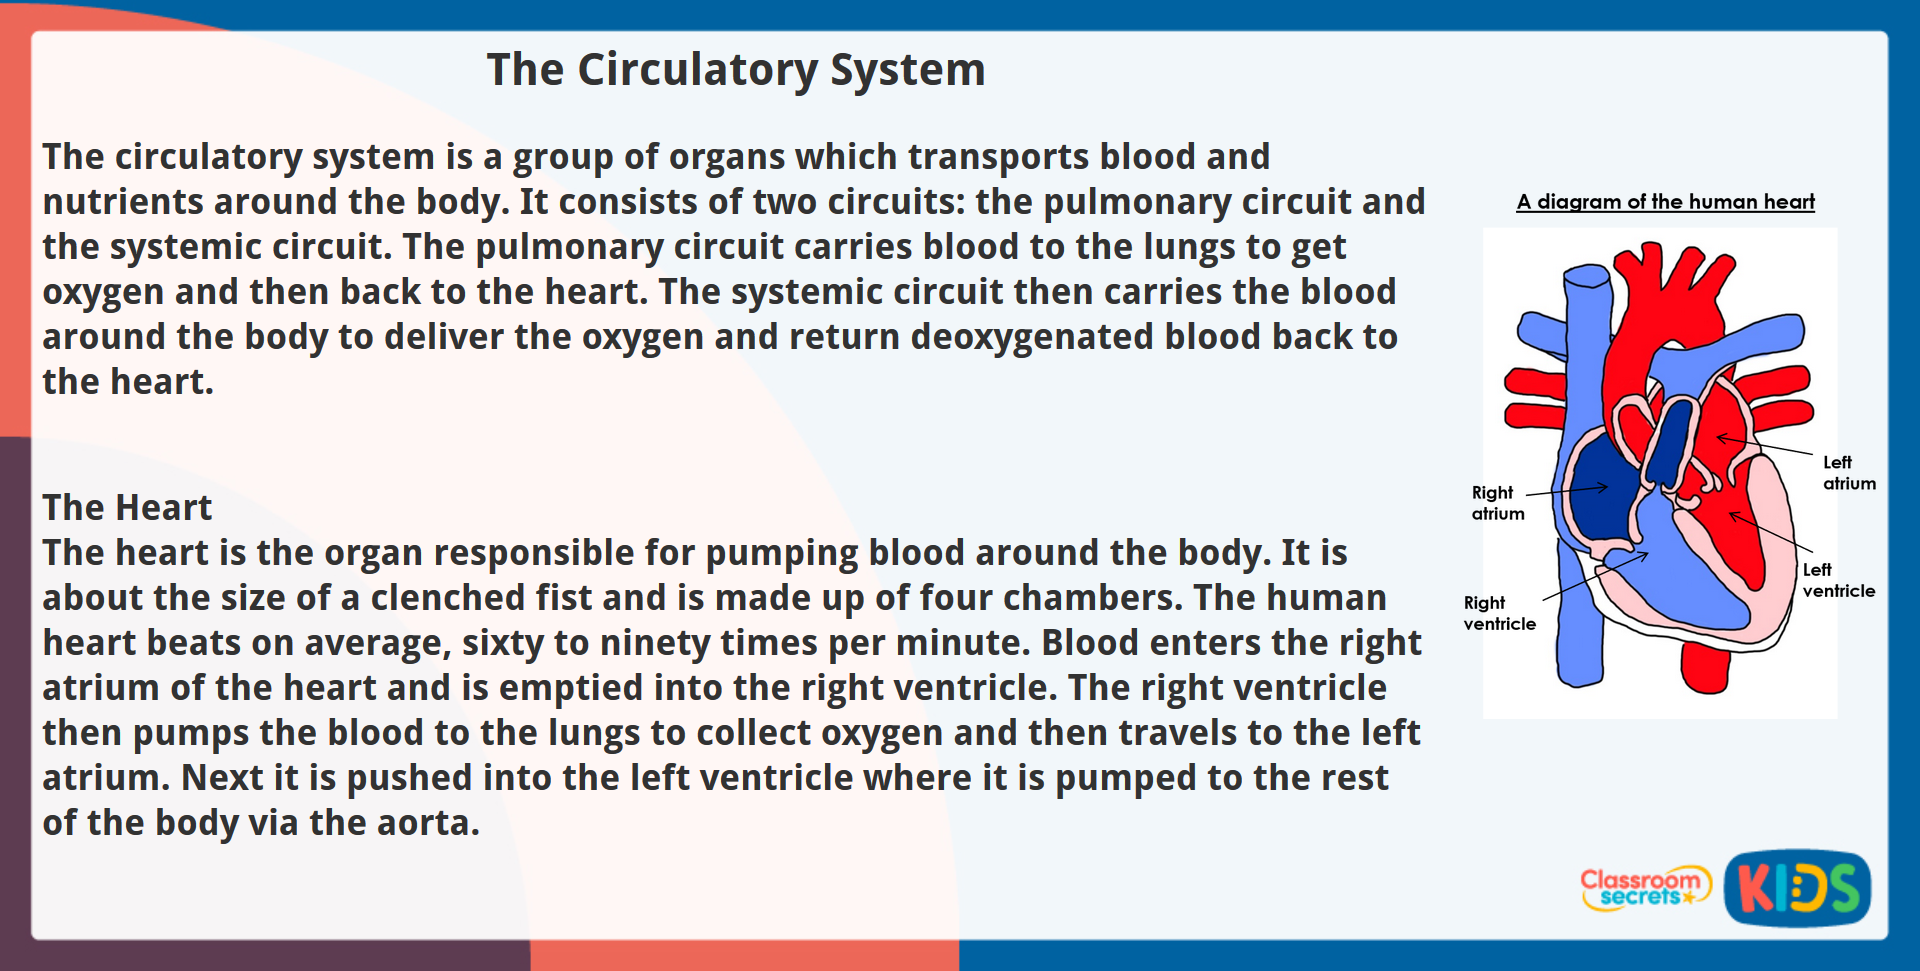 Year 5 Non-Fiction Reading Comprehension The Circulatory System